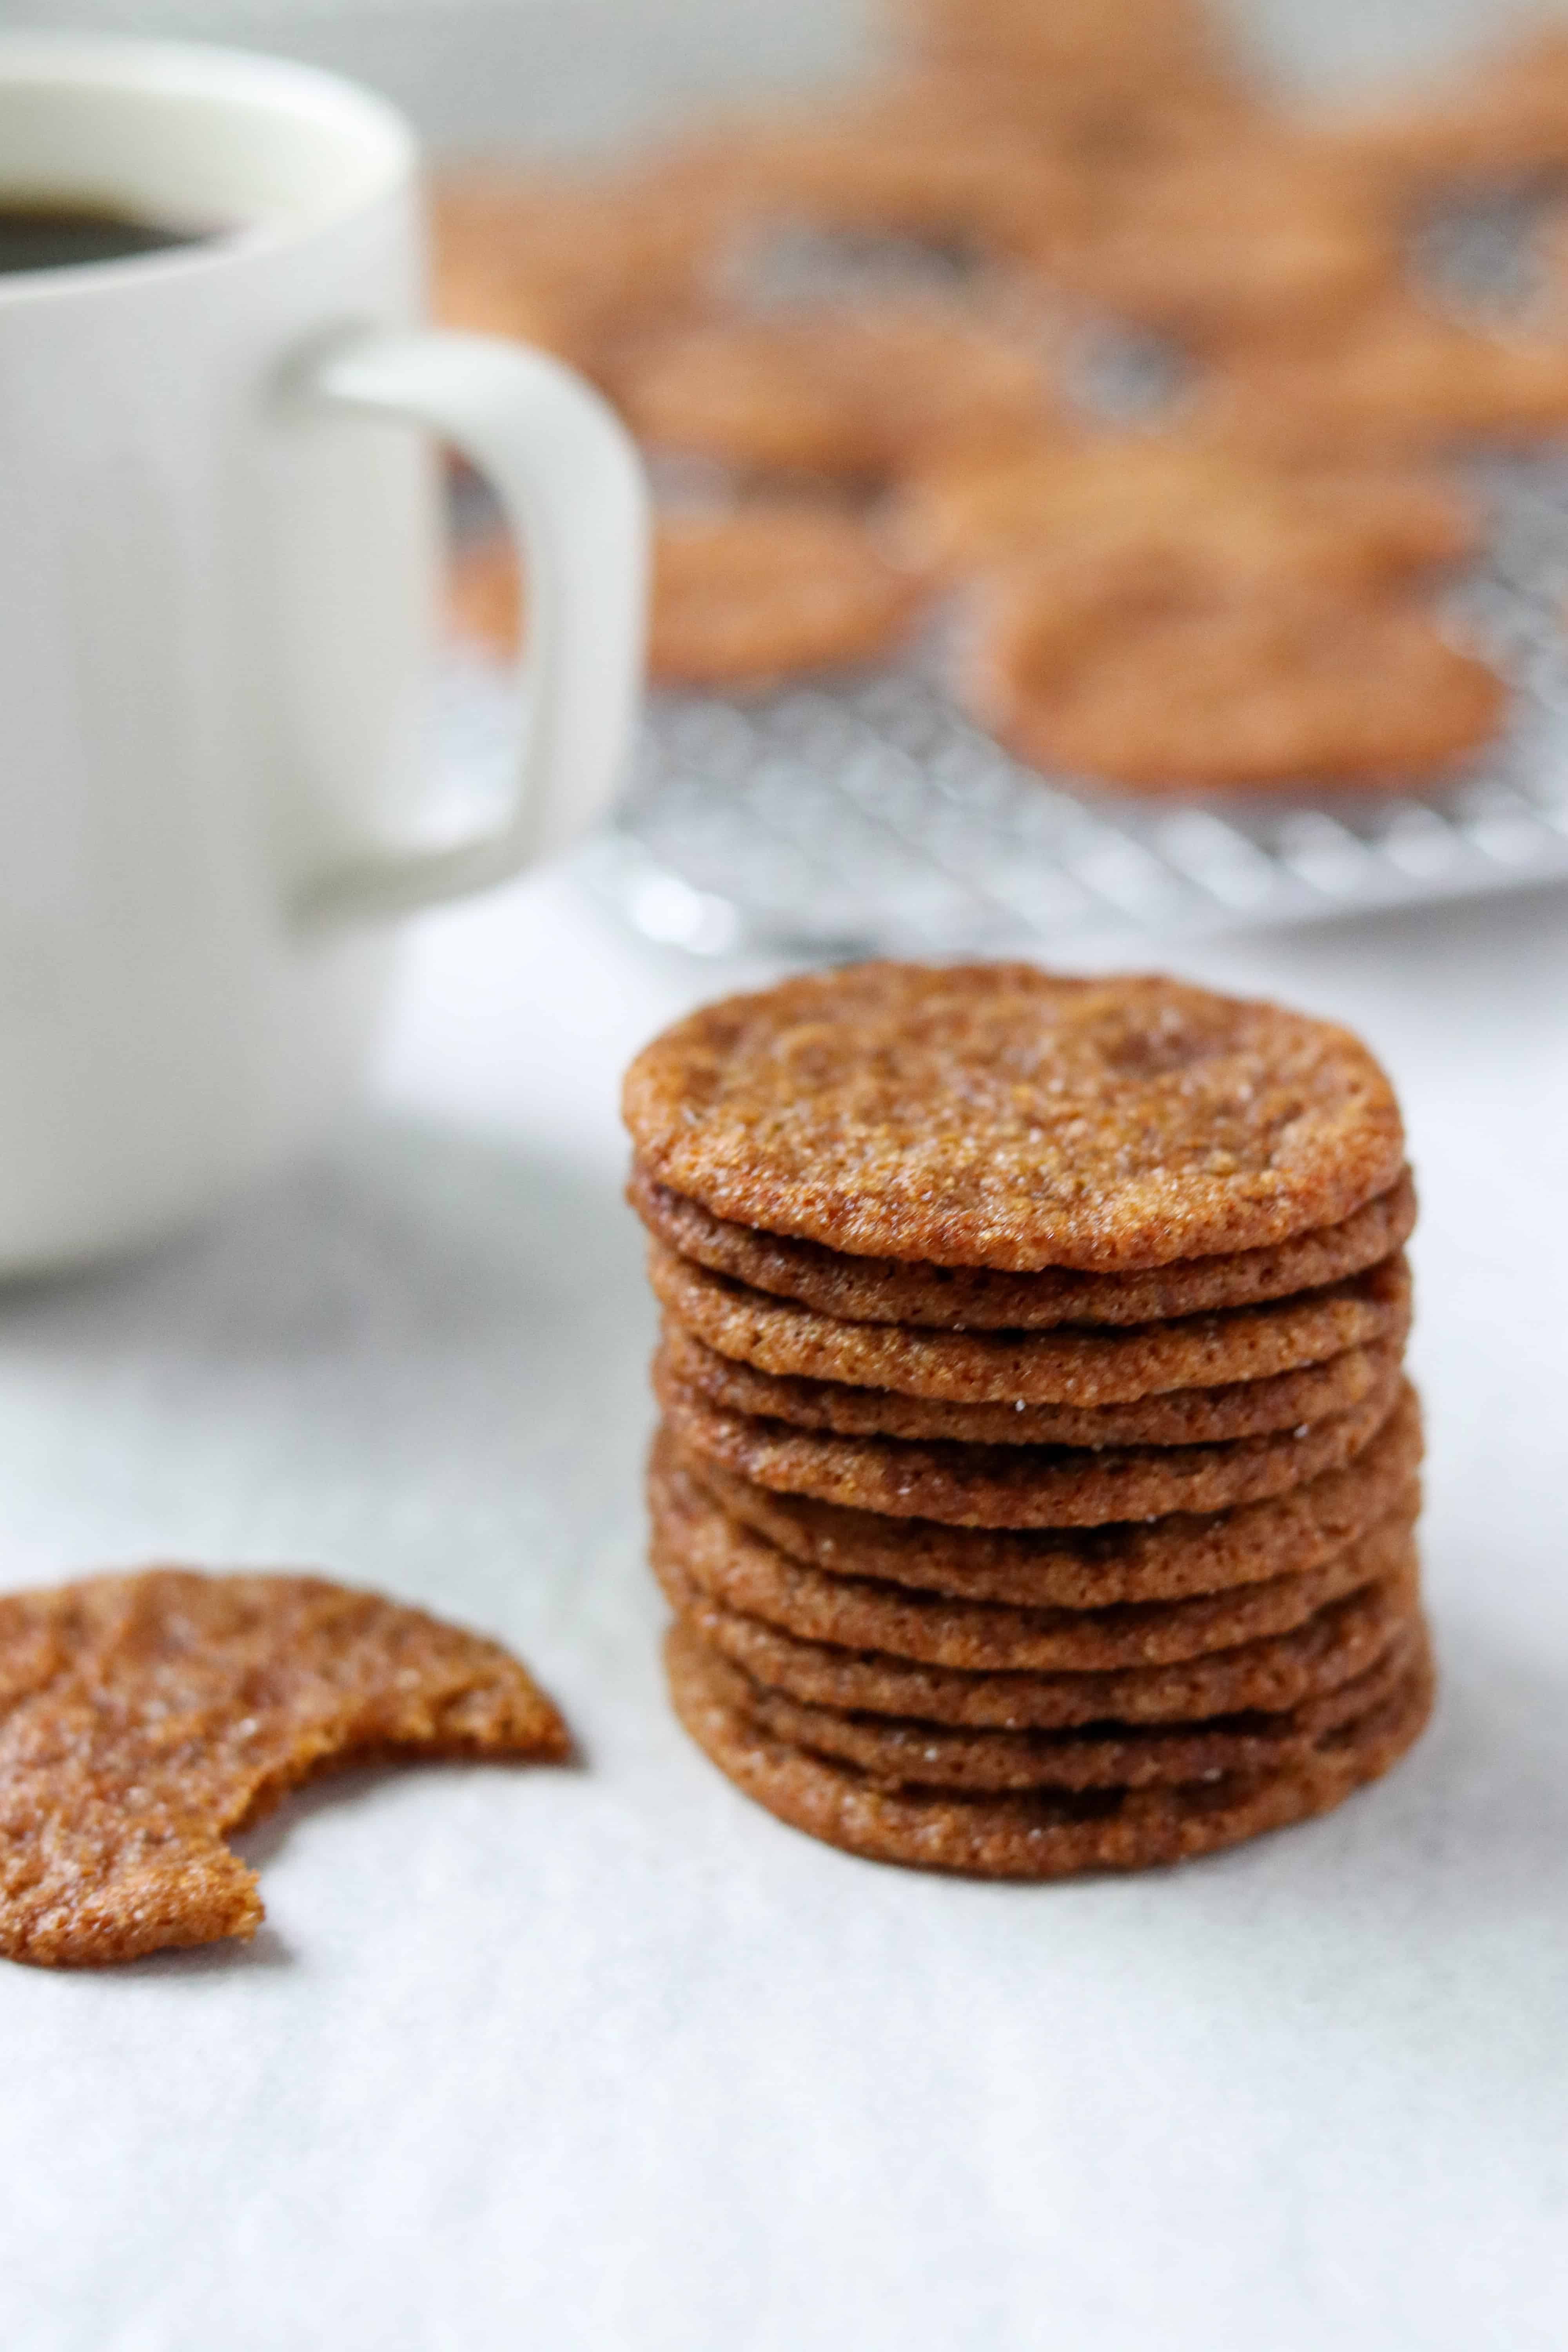 A close up of a stack of Swedish ginger snaps and a cup of coffee